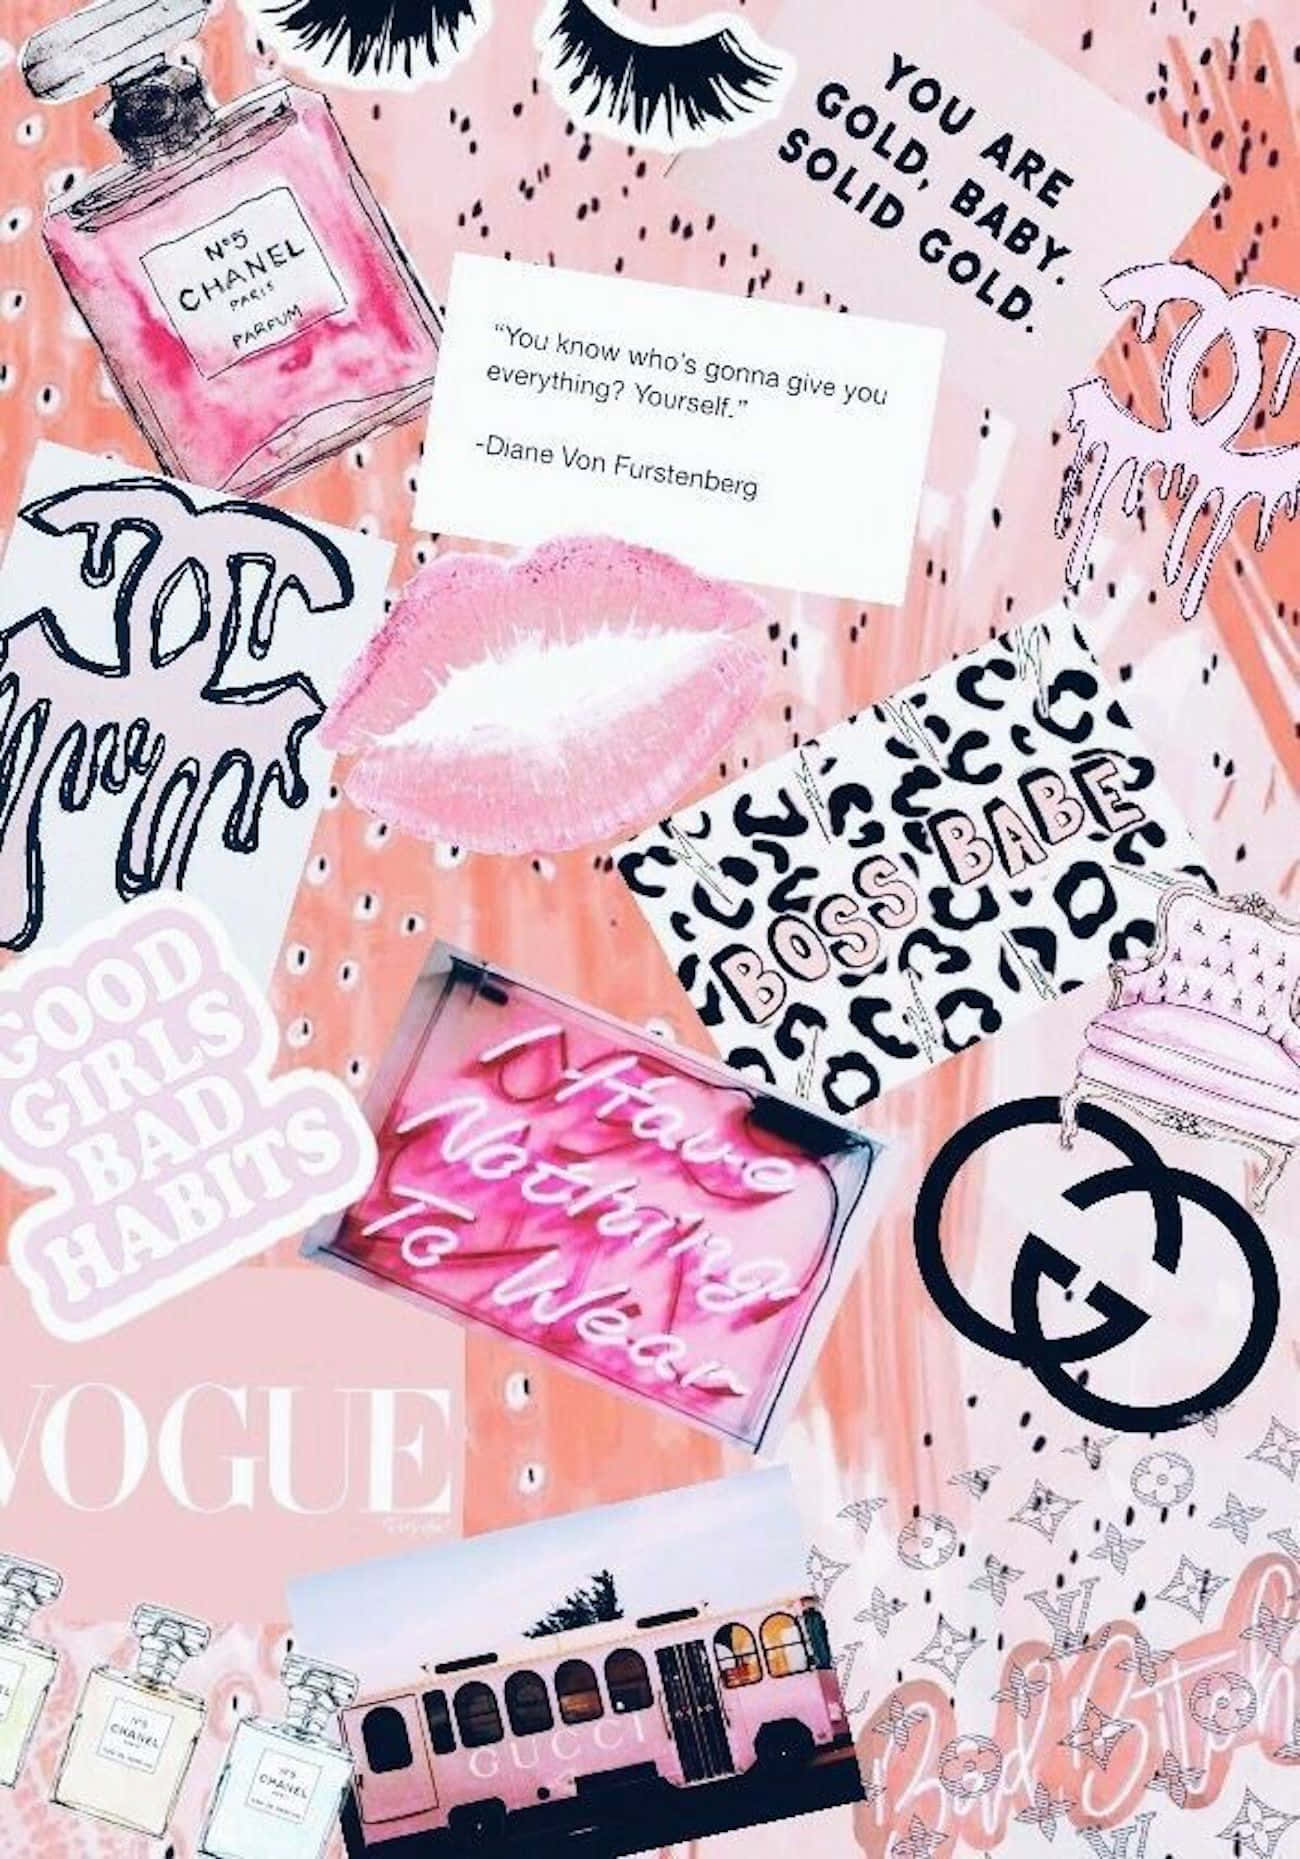 Aesthetic Pink Collage Brand Logos And Girly Stuff Wallpaper